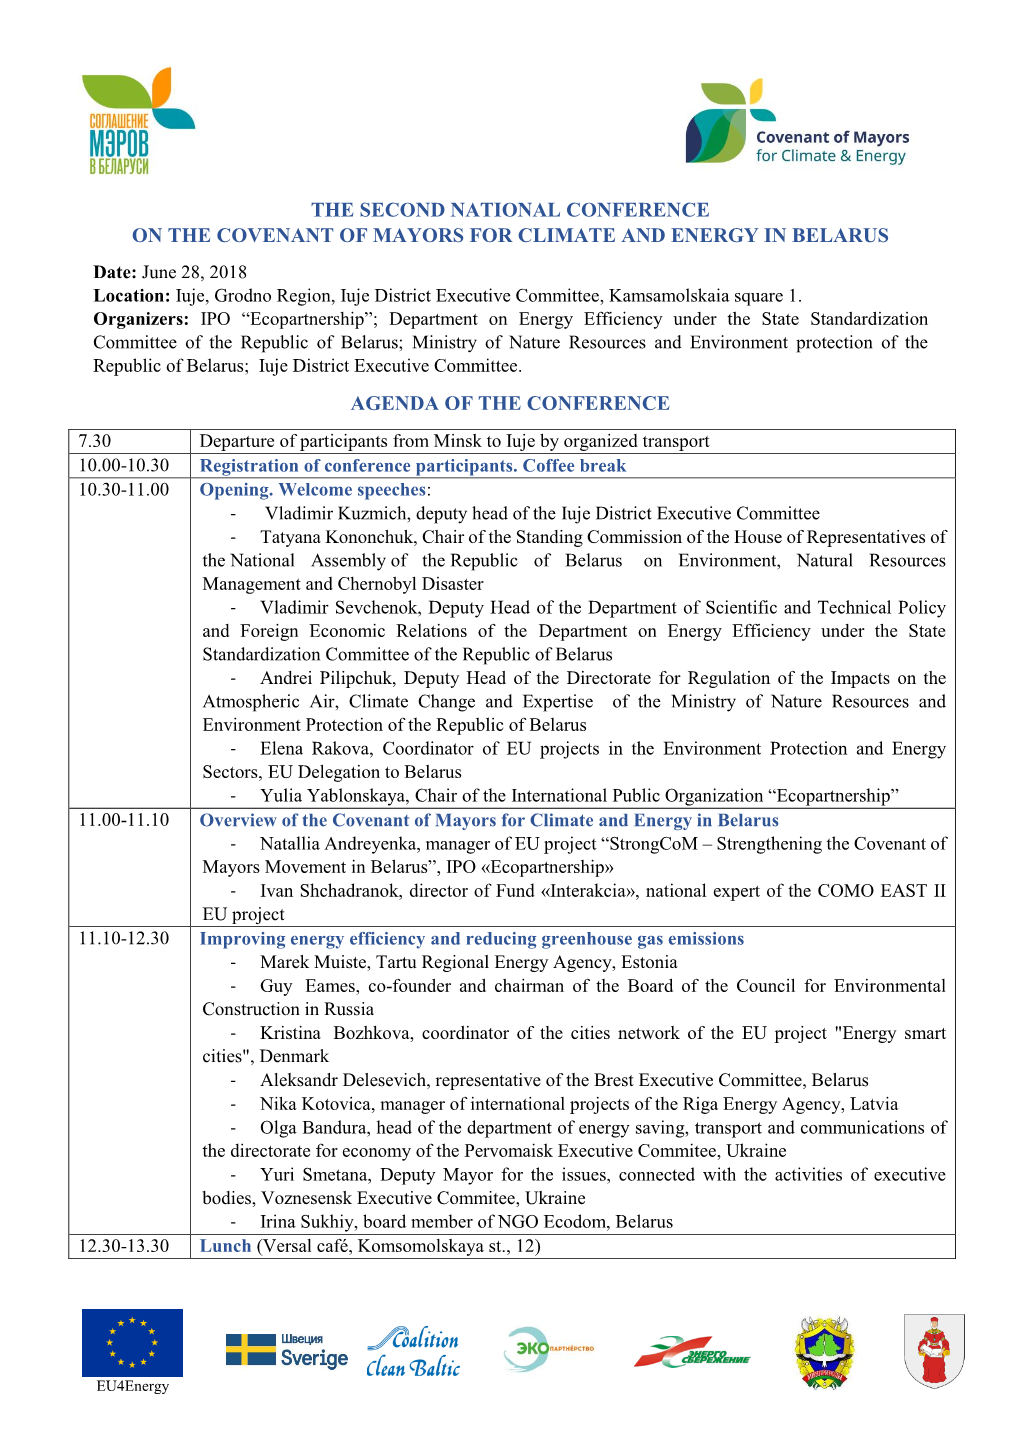 The Second National Conference on the Covenant of Mayors for Climate and Energy in Belarus